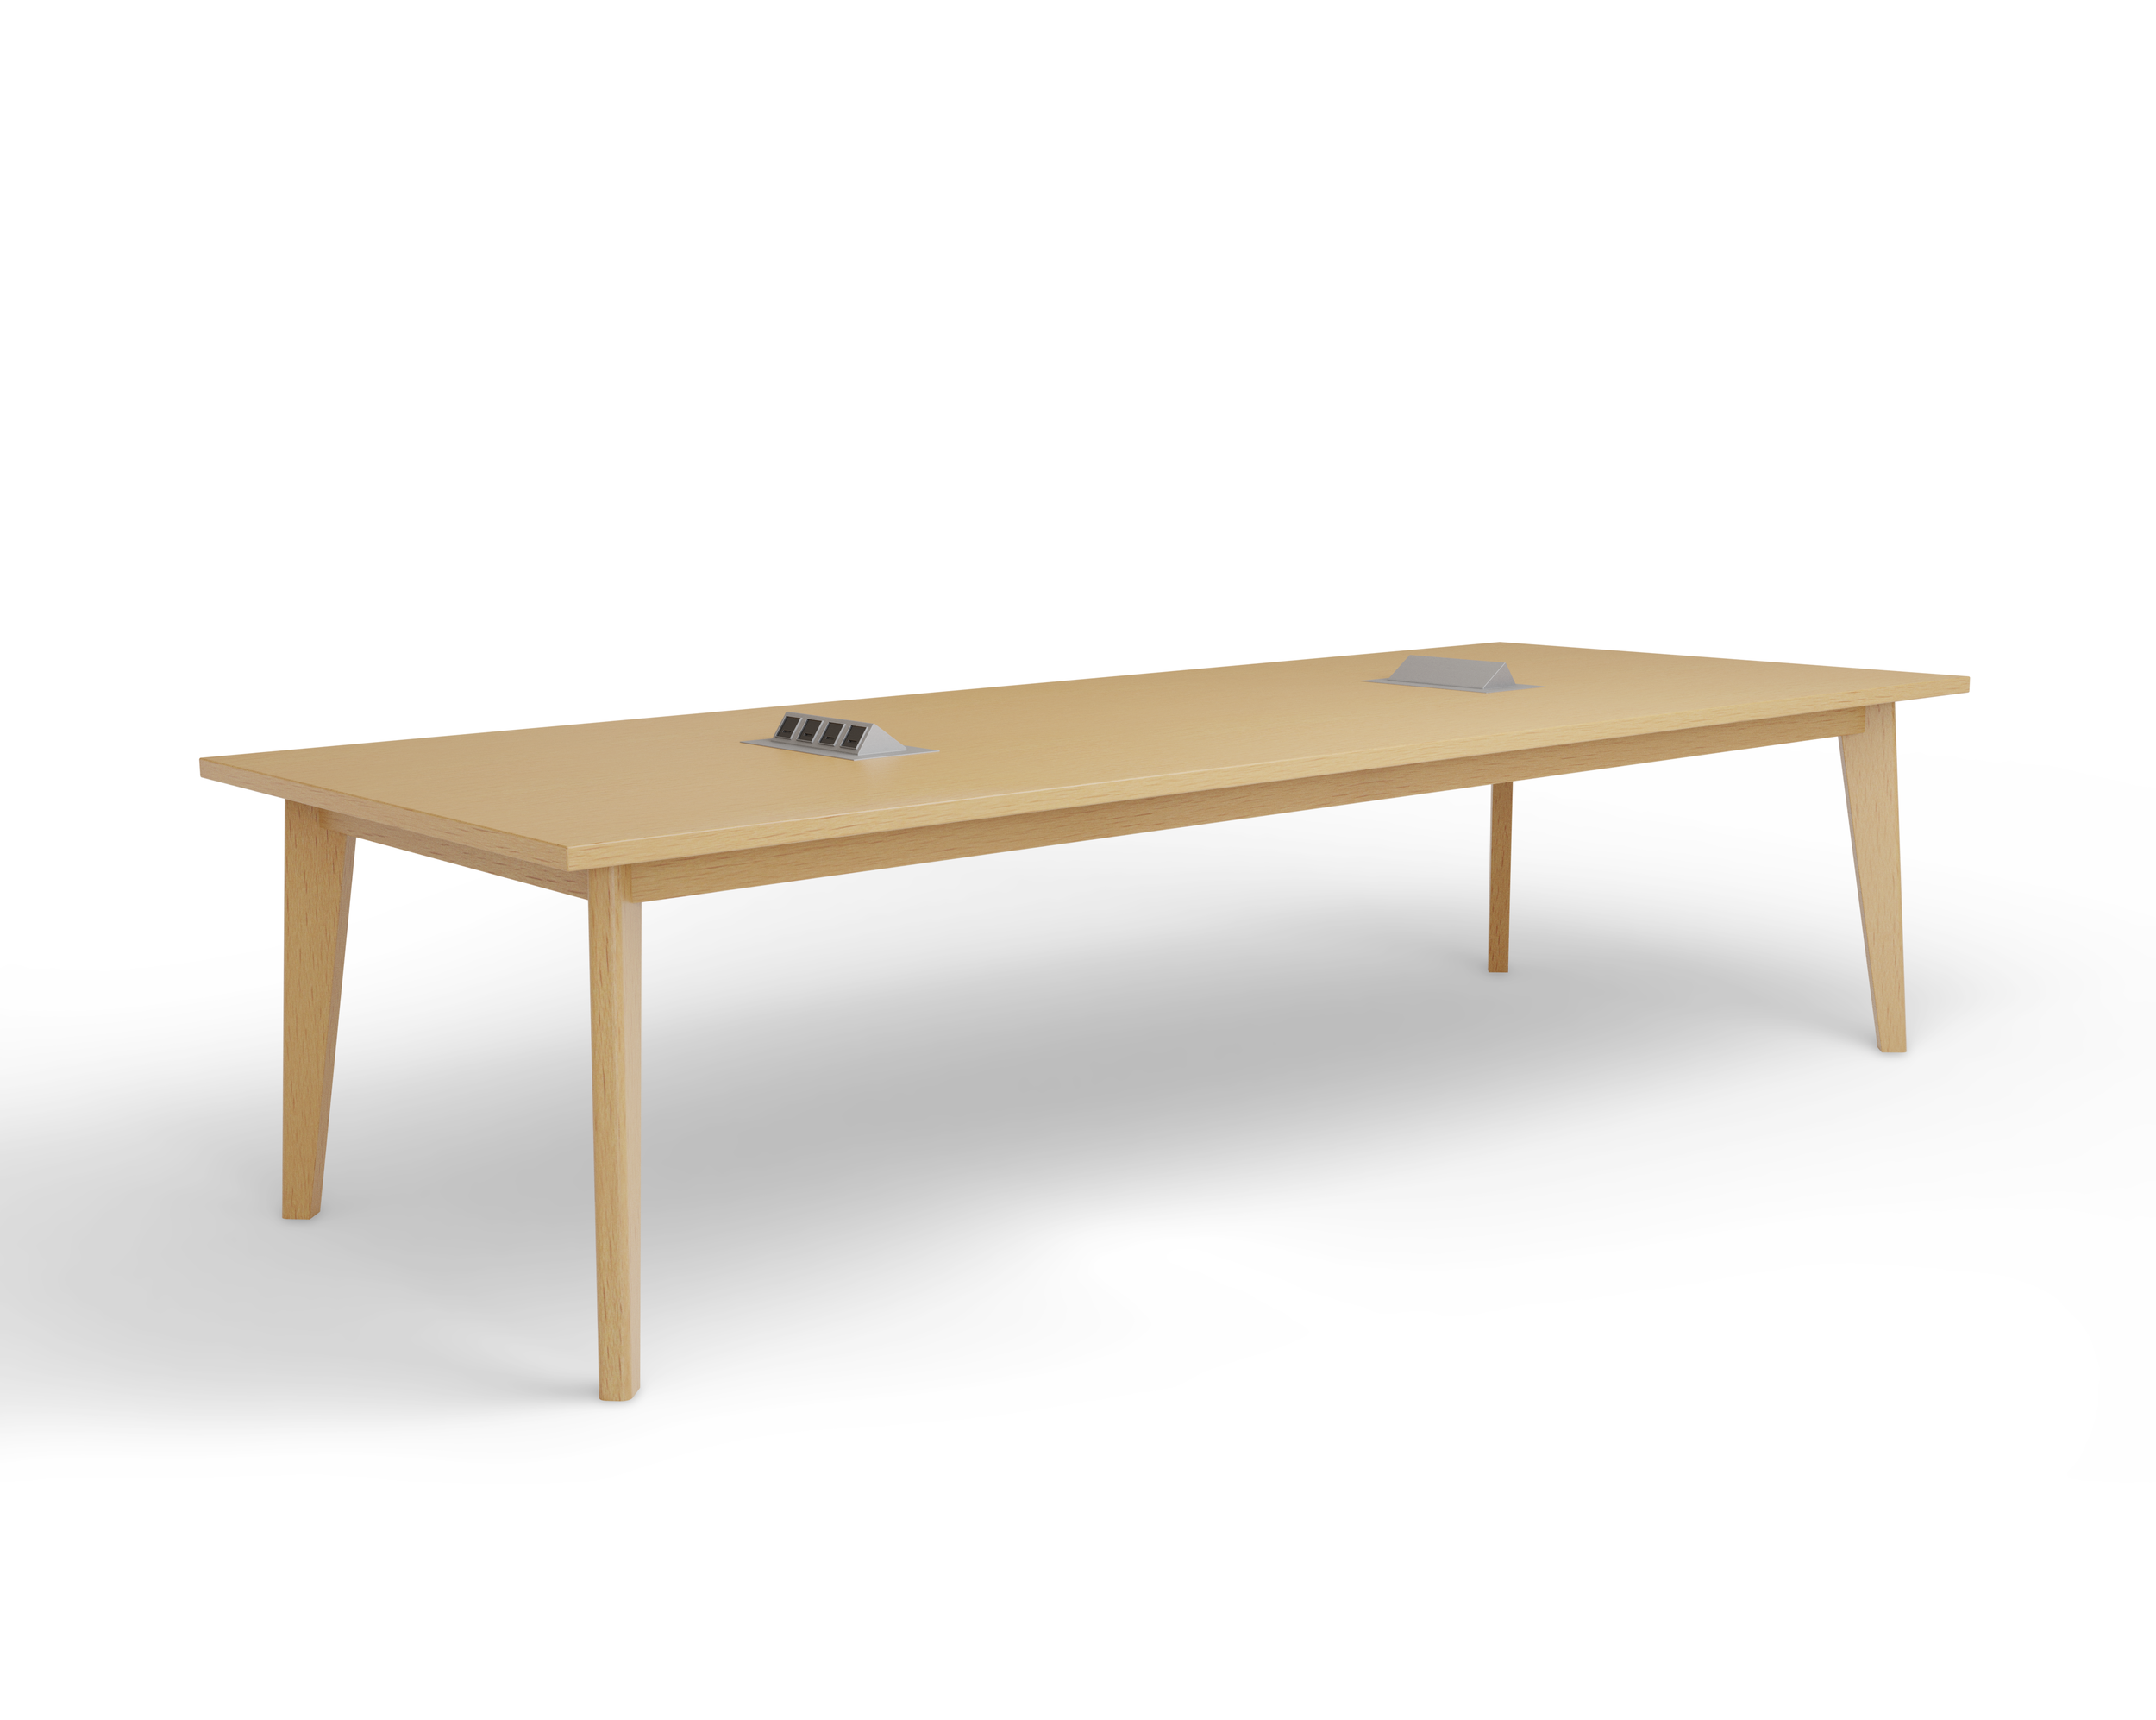 1092-12048 ELLISON BASE WITH EASED EDGE IN HONEY BEECH FINISH WITH P14 DATA UNITS